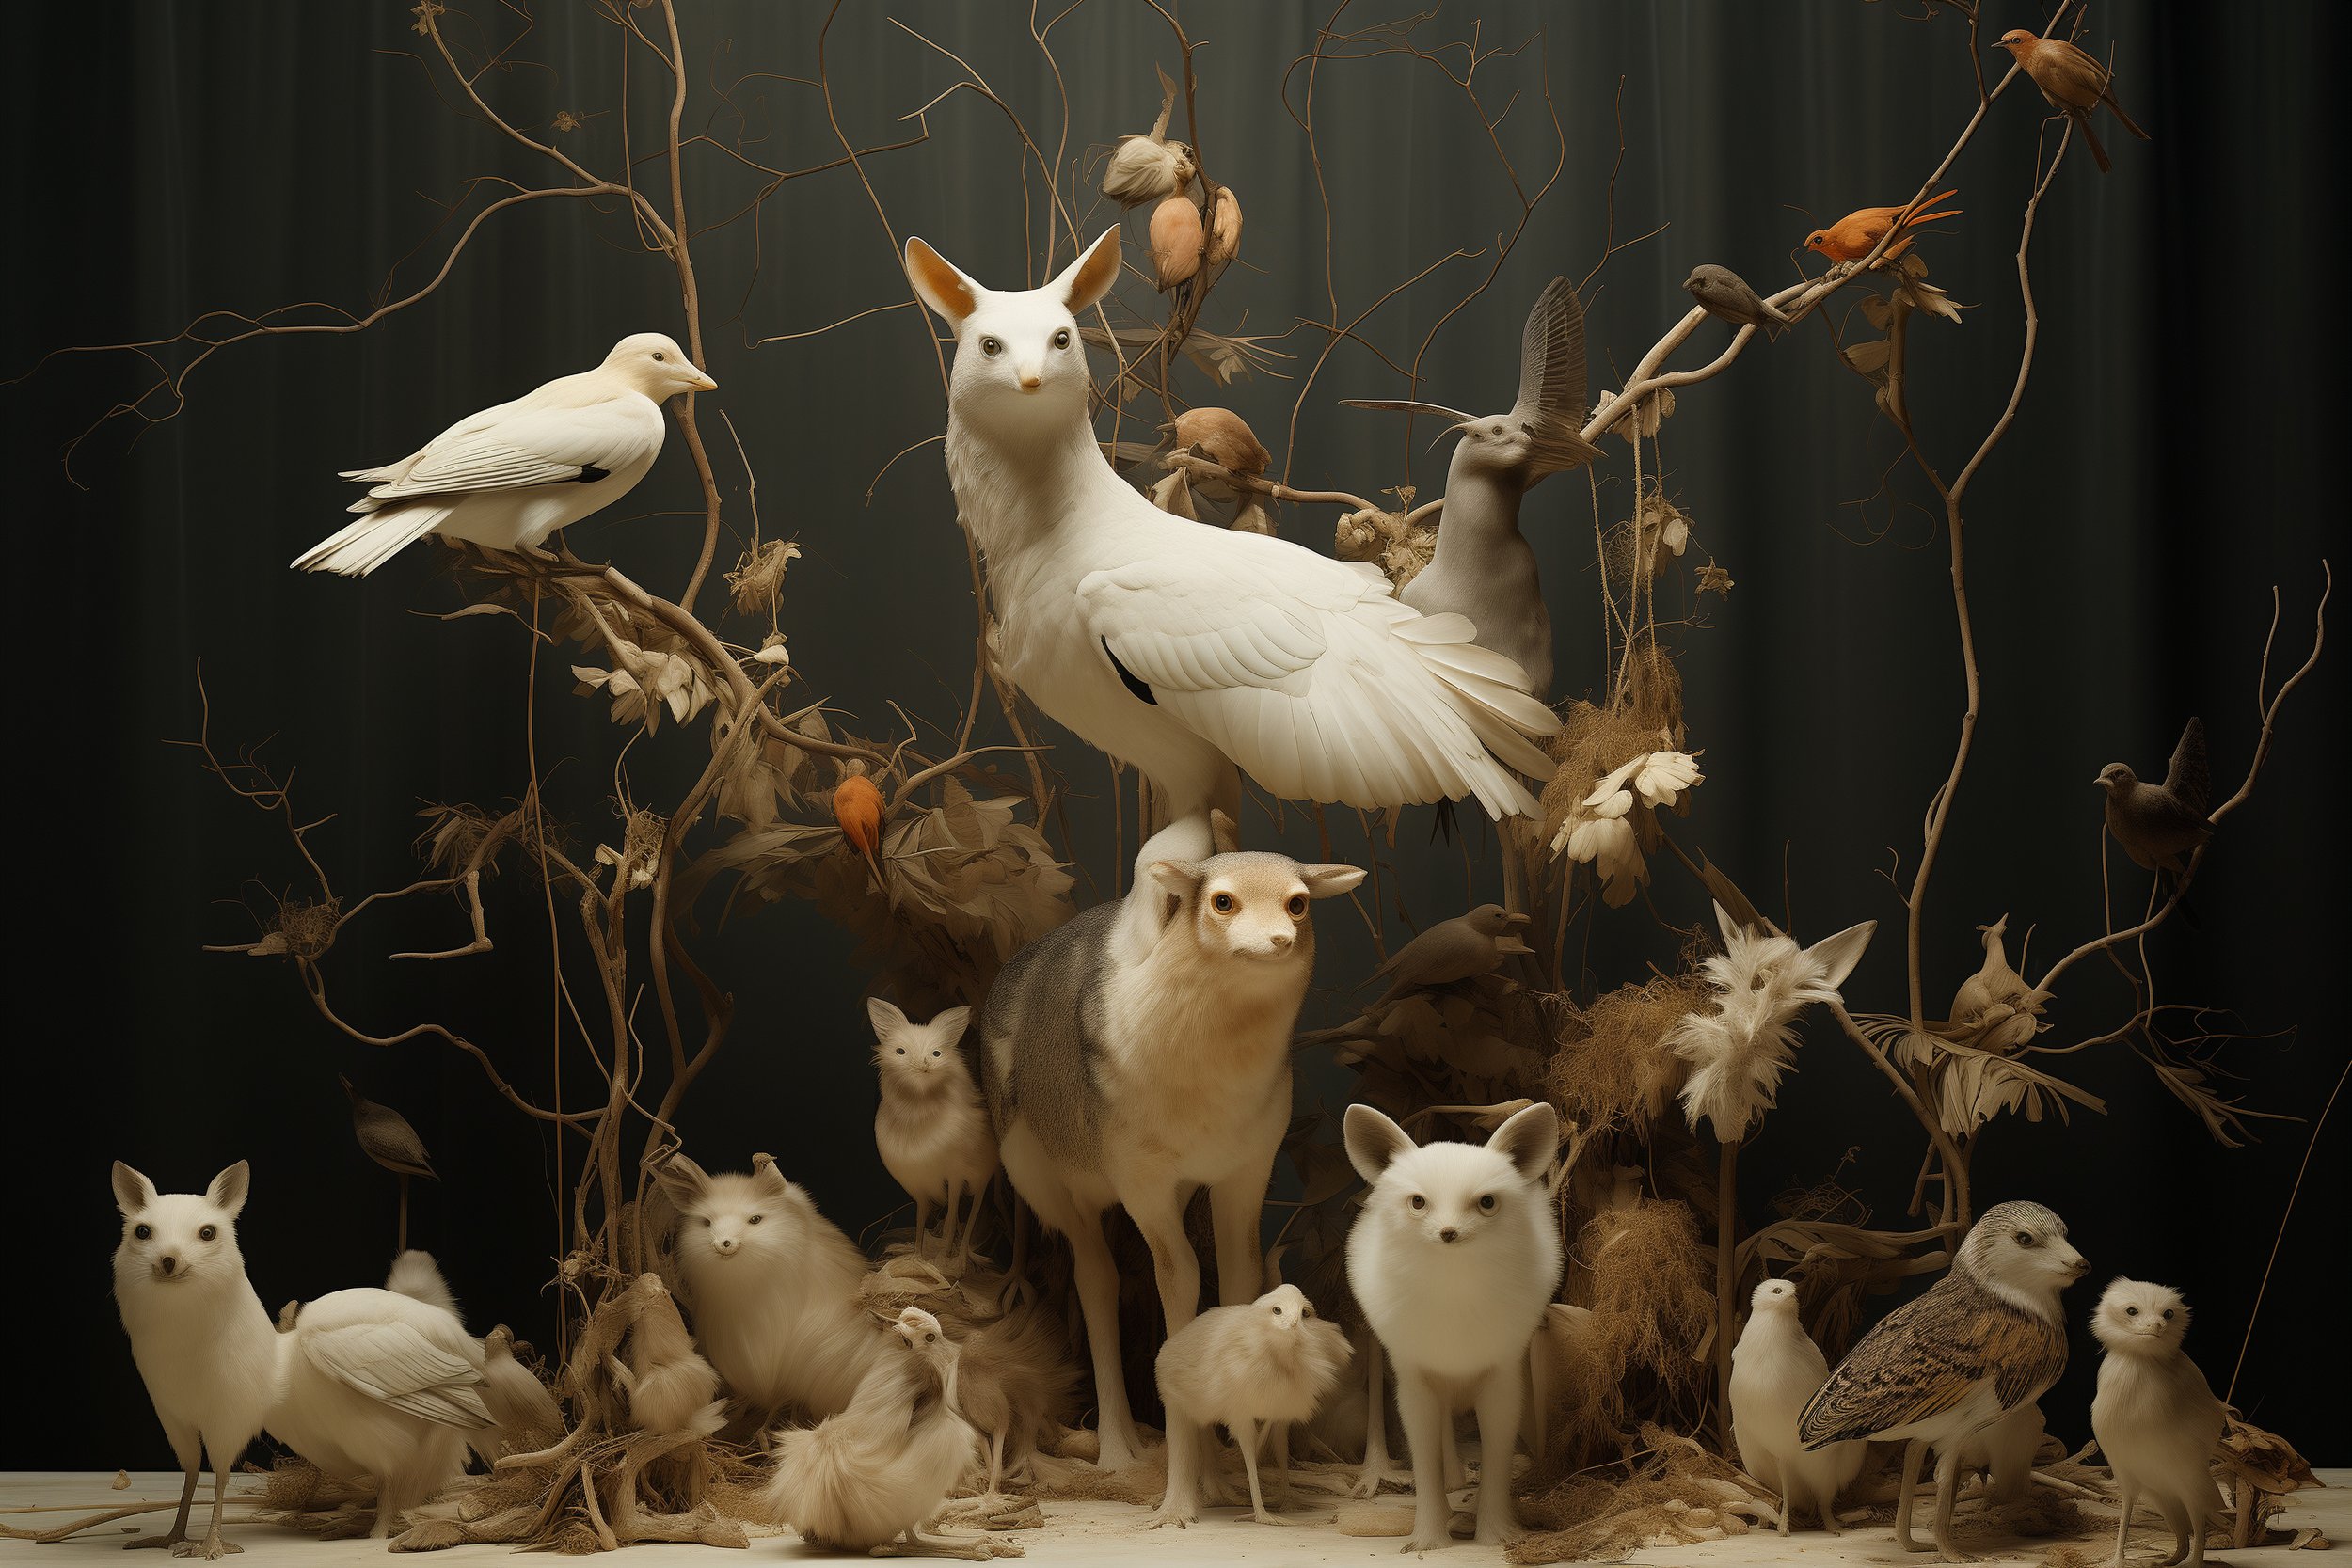 Synthetica Naturae - Art by artist Diddo | Digital Taxidermy | AI Generated Nature | AI art